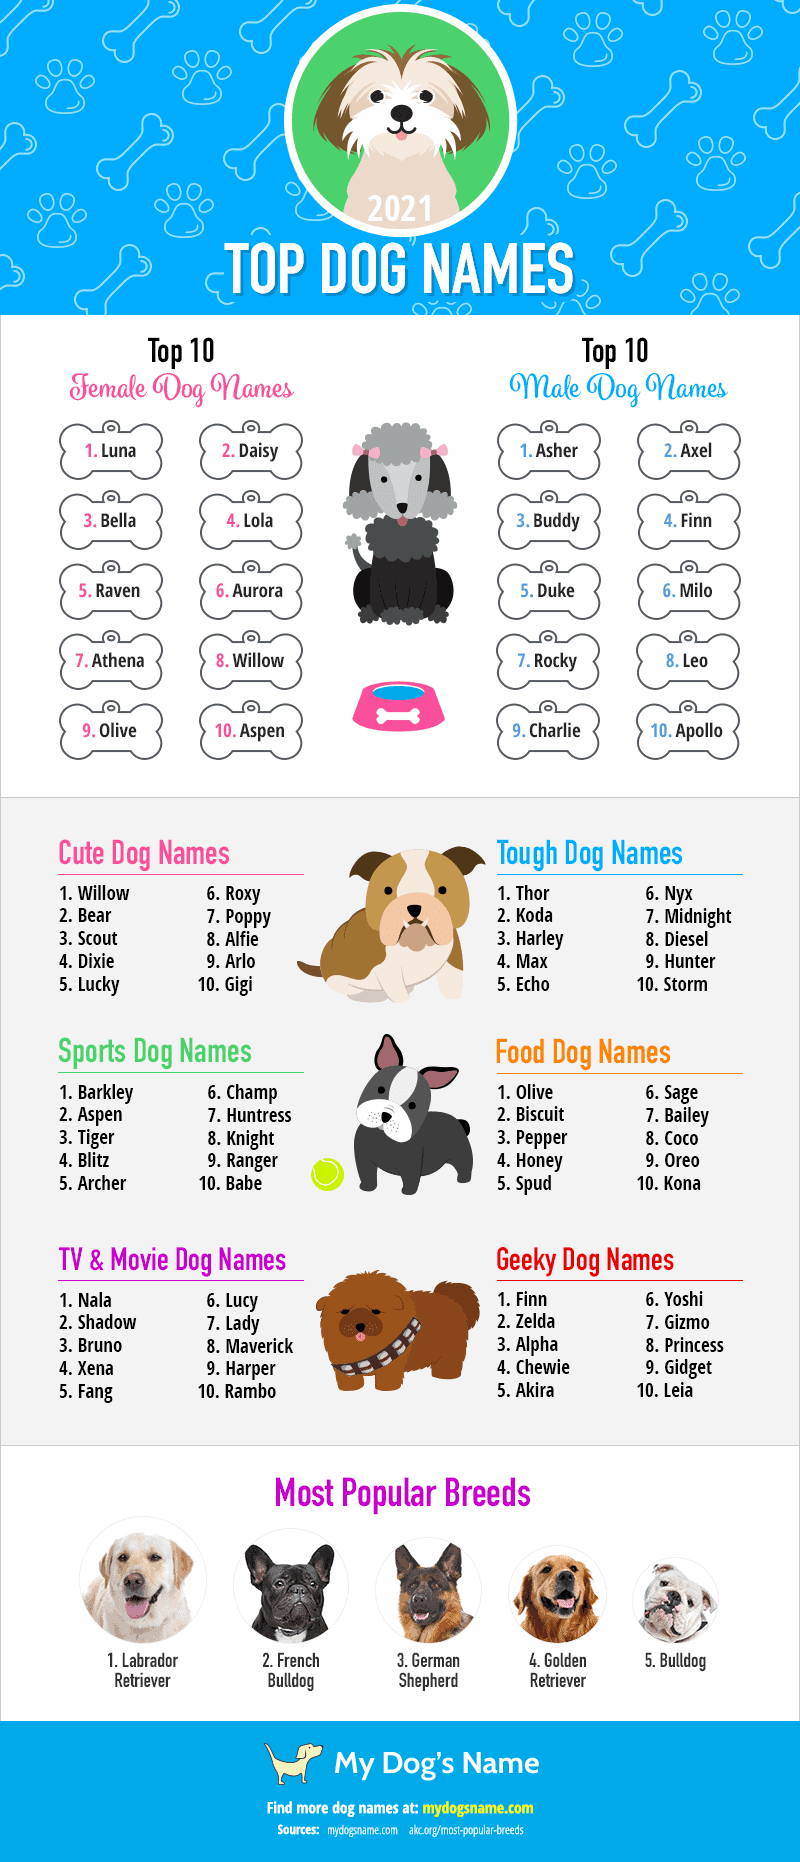 top dog names of 2021 infographic